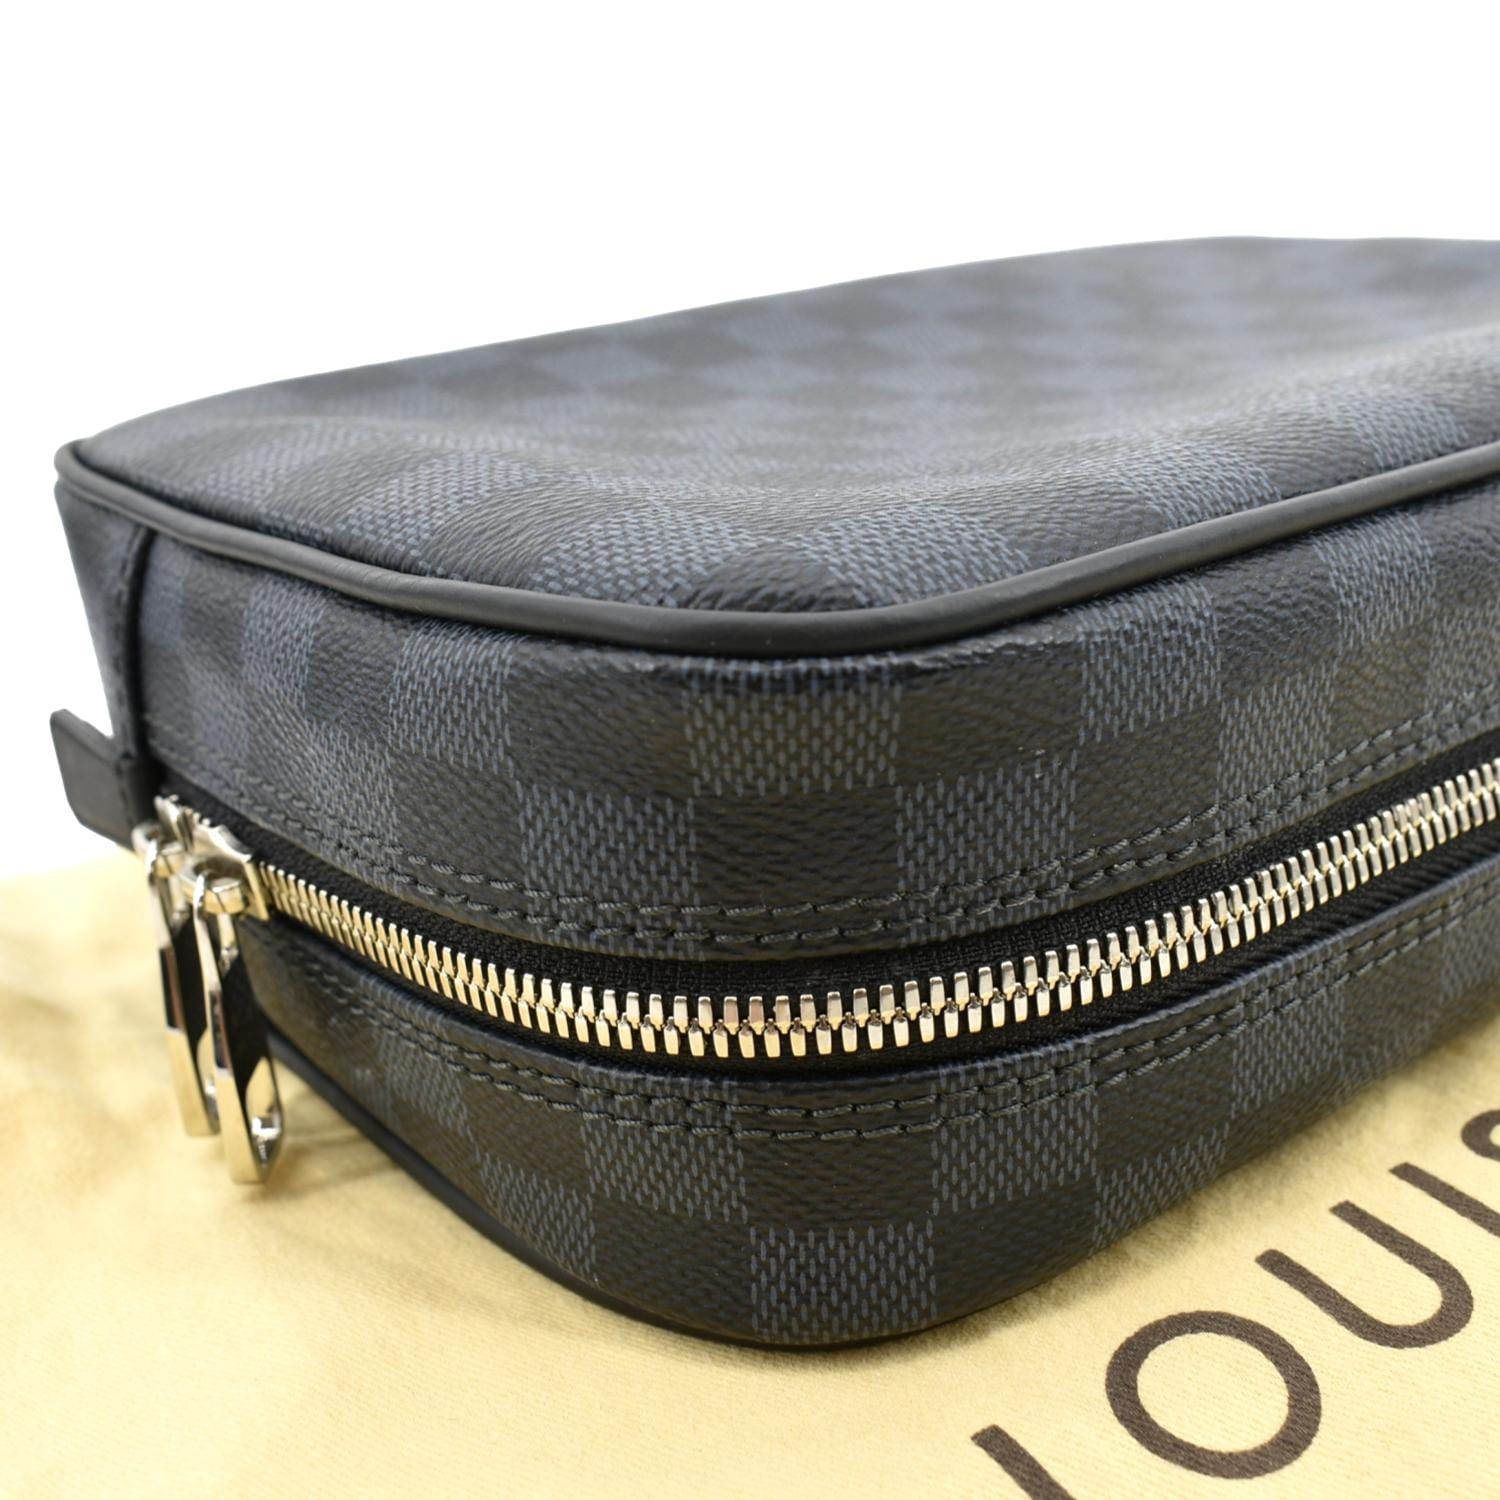 LOUIS VUITTON TOILETRY BAG IN DAMIER GRAPHITE POUCH Grey Leather